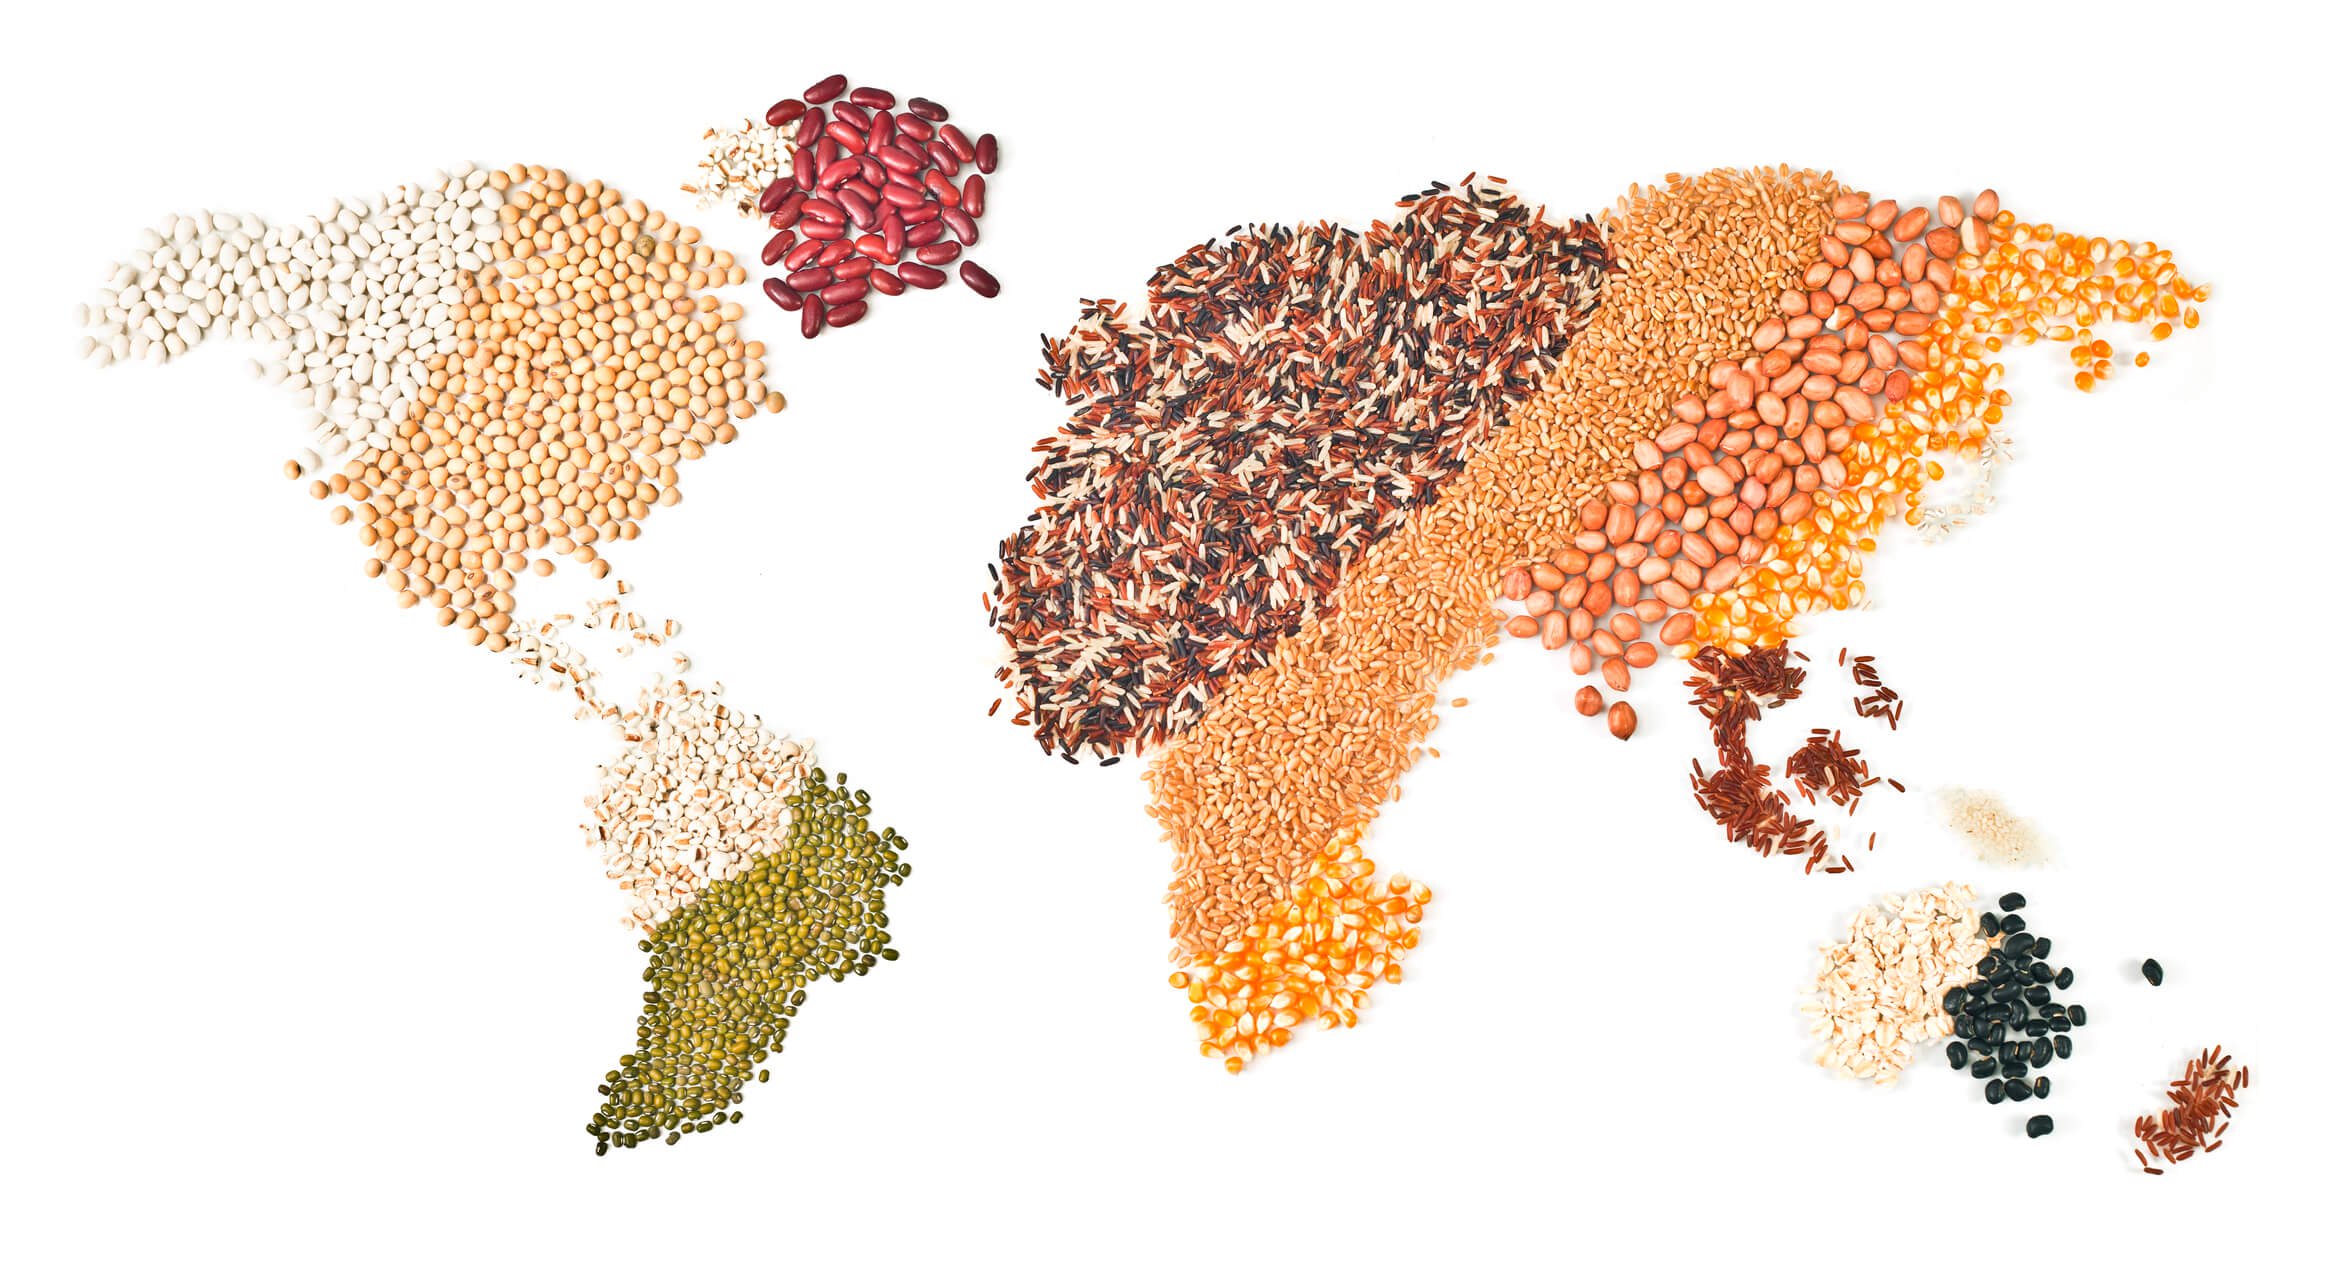 World map made out of grains and legumes